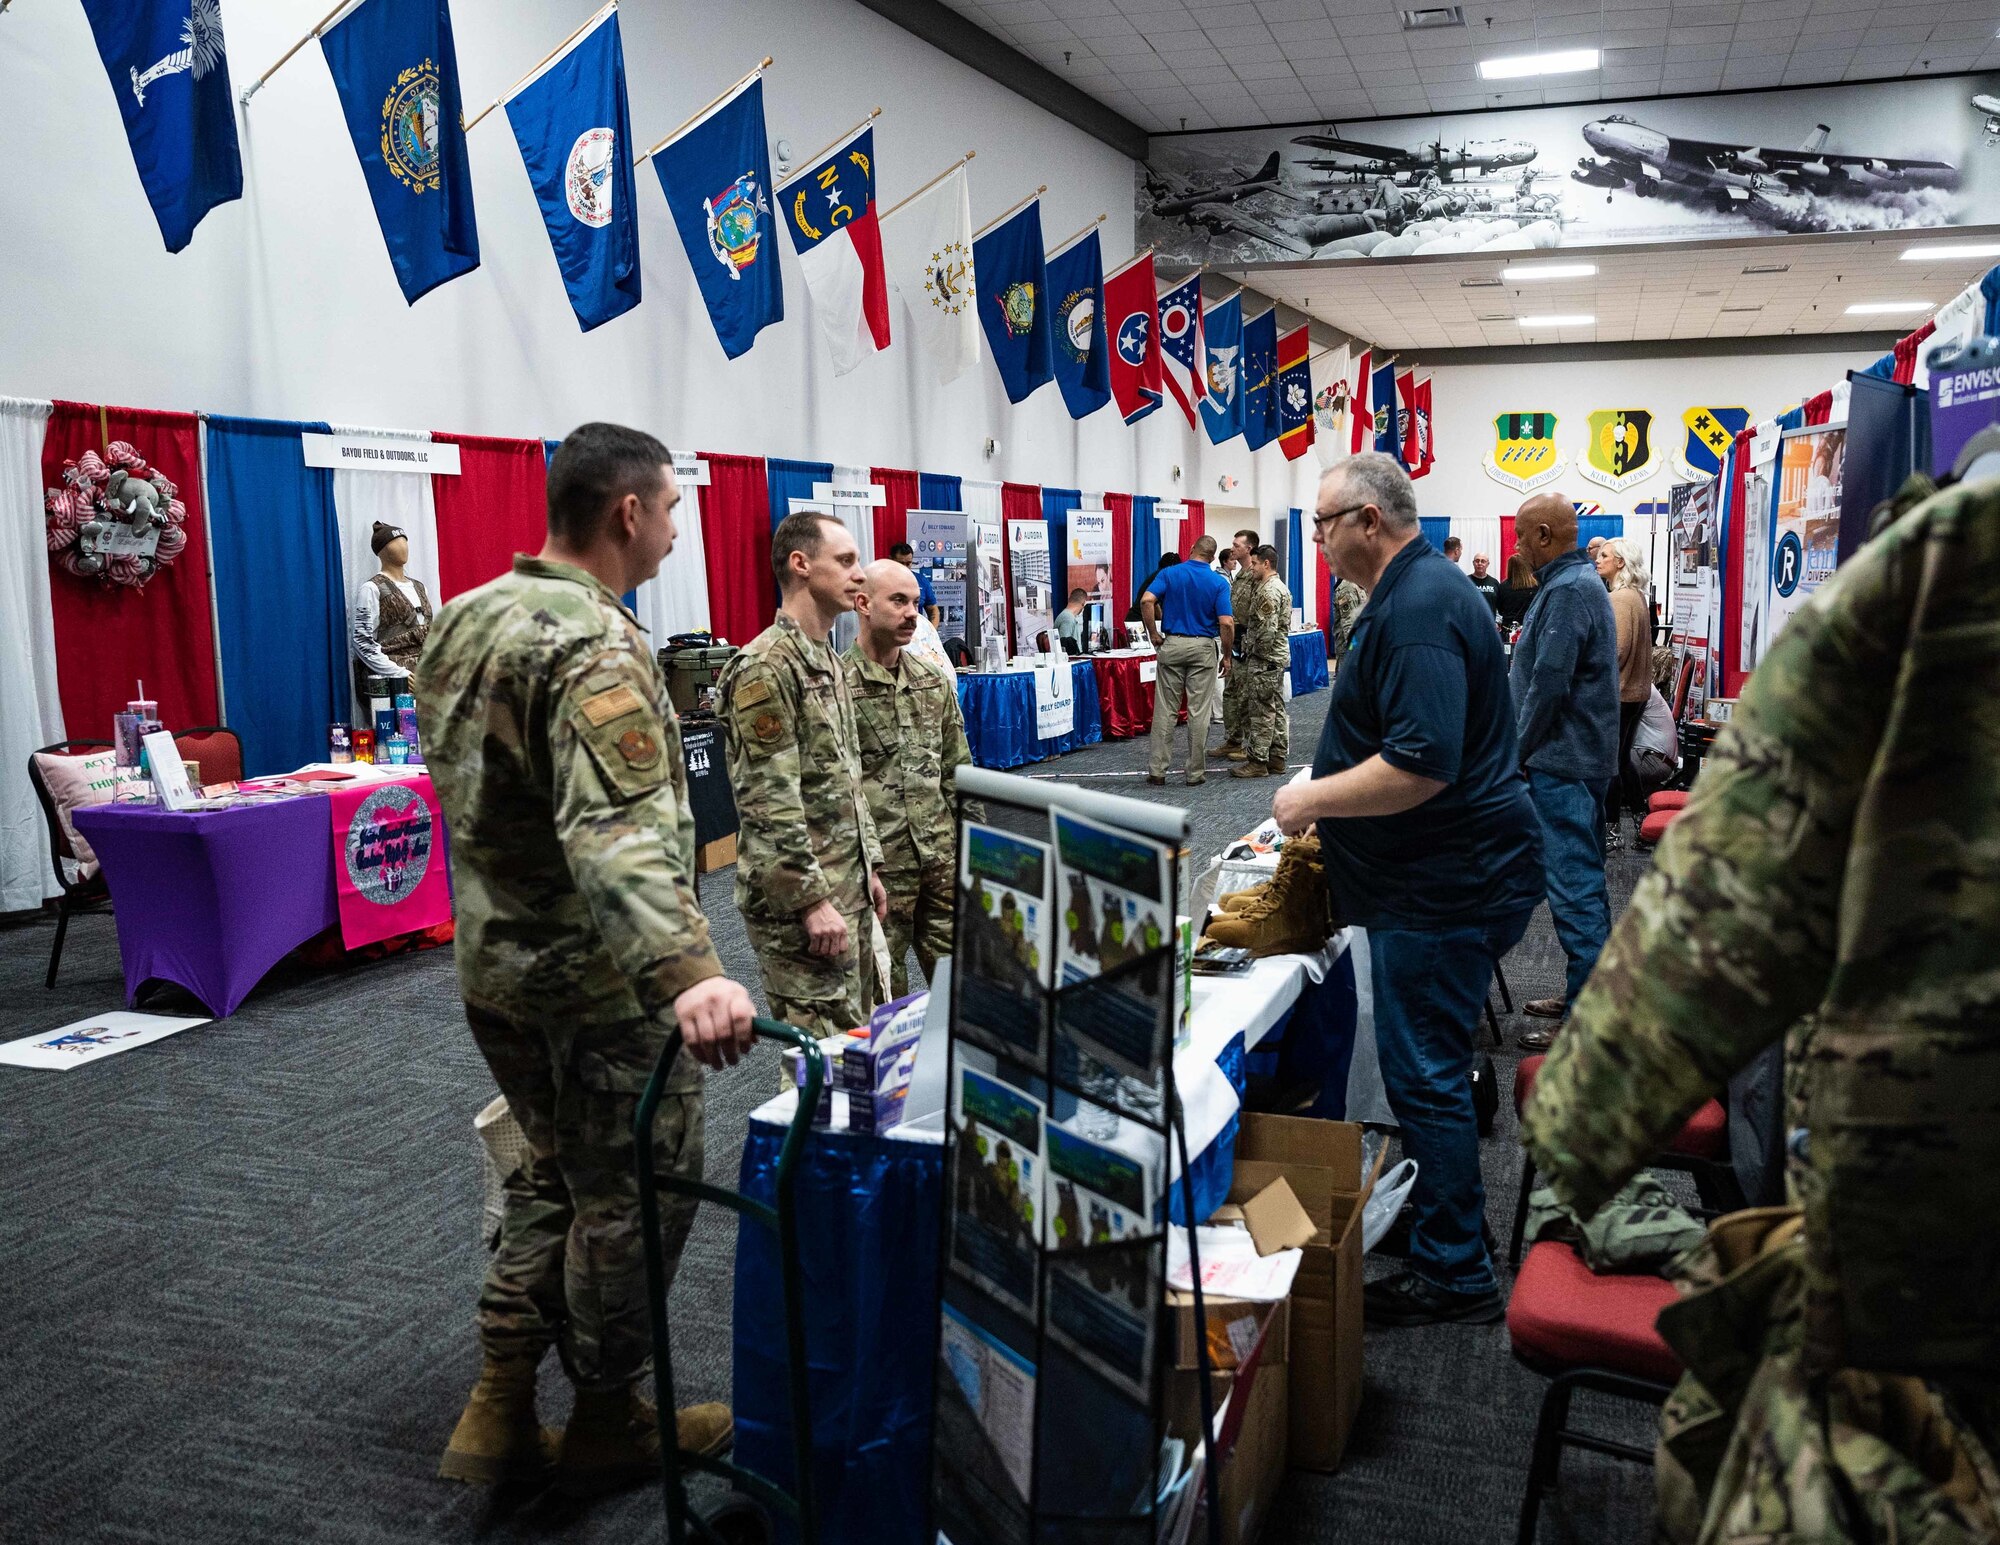 The event gave Airmen an opportunity to interact with local businesses that provide services and supplies to Barksdale.